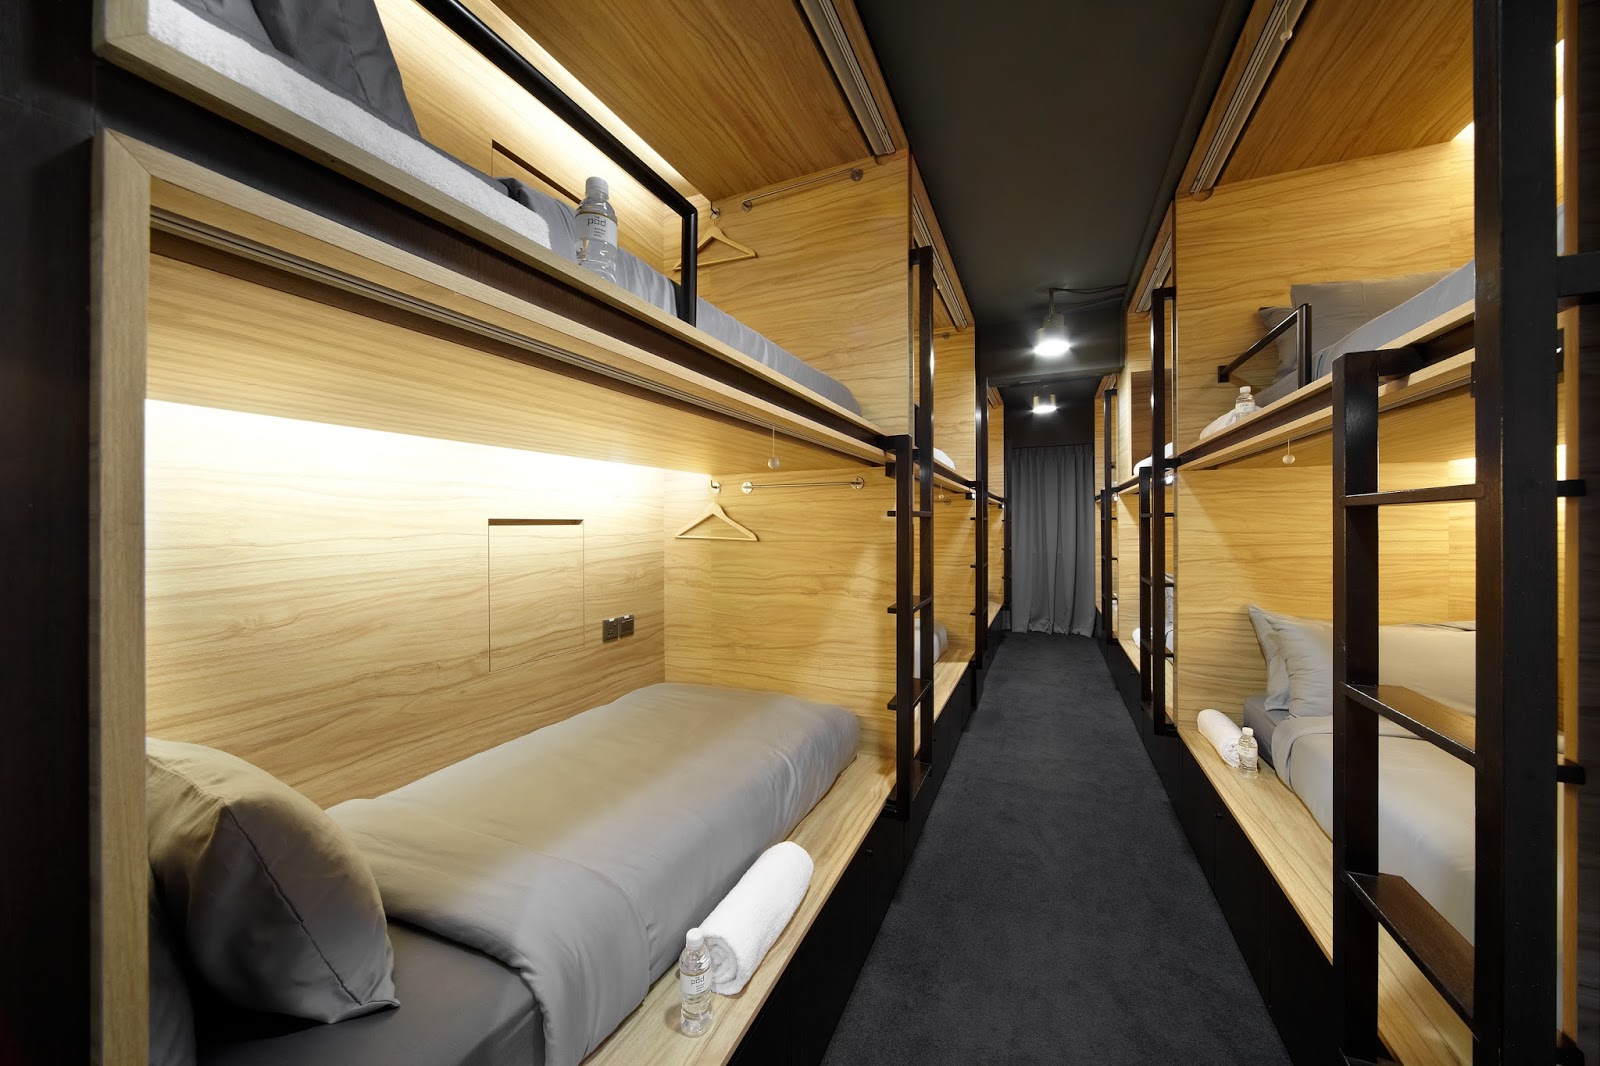 The Pod Boutique Capsule Hotel: Promising Effortless Living ...